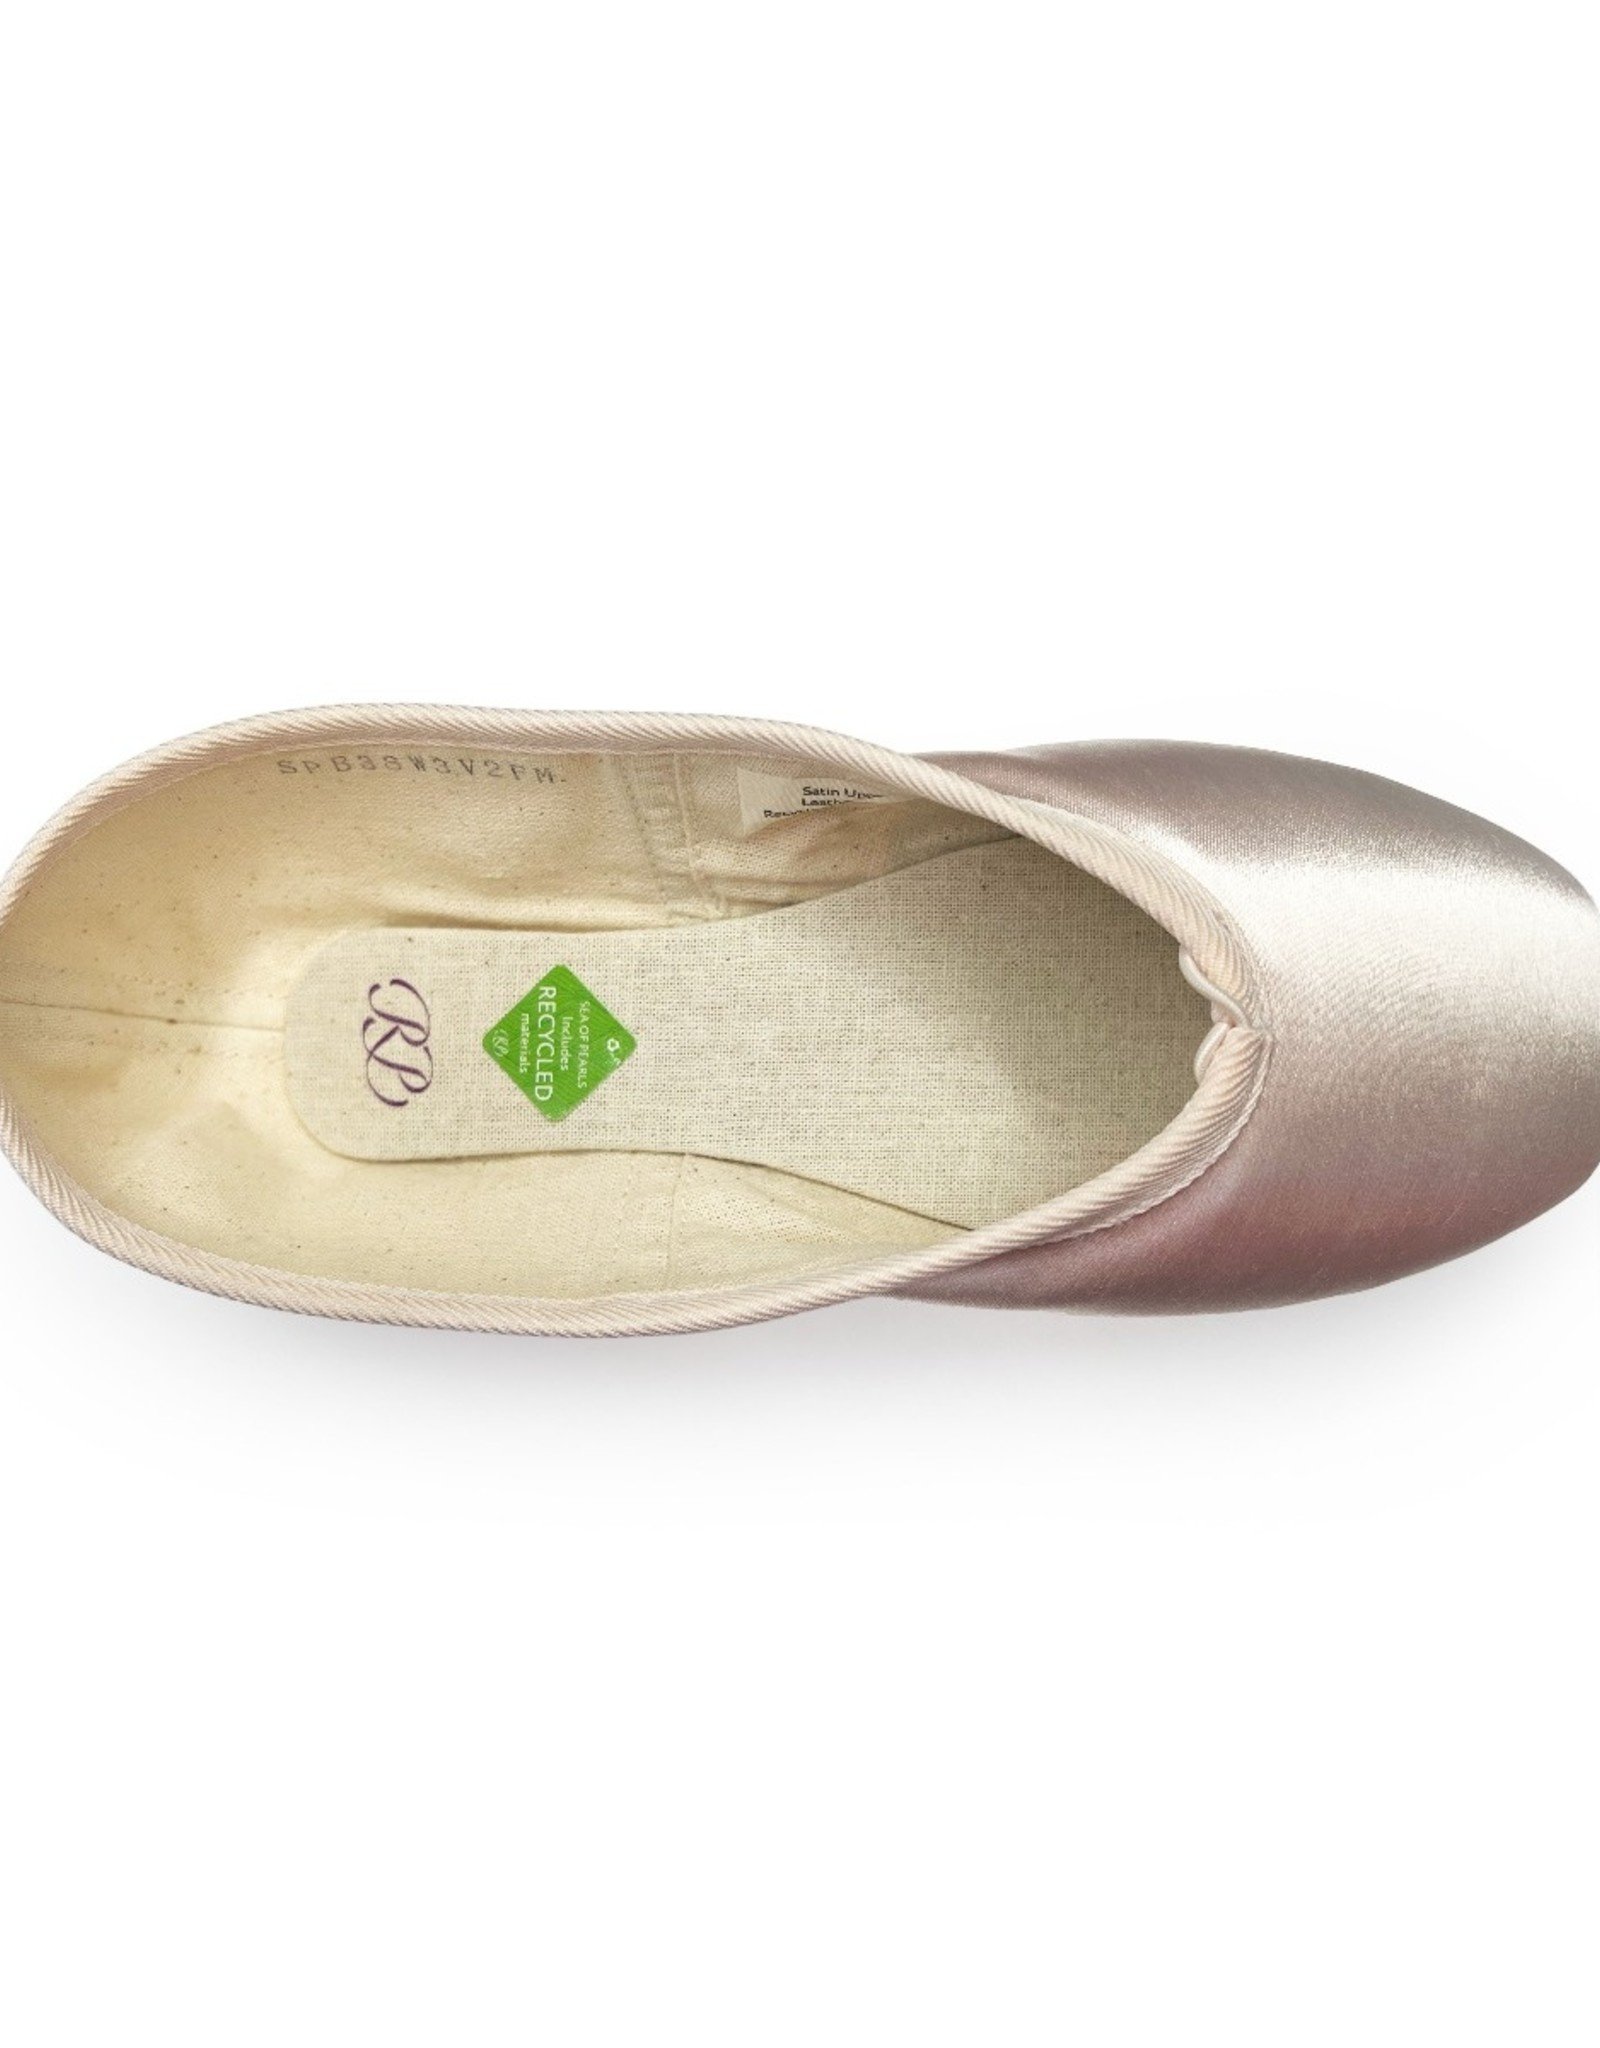 RP Collection Baroque Pointe Shoes